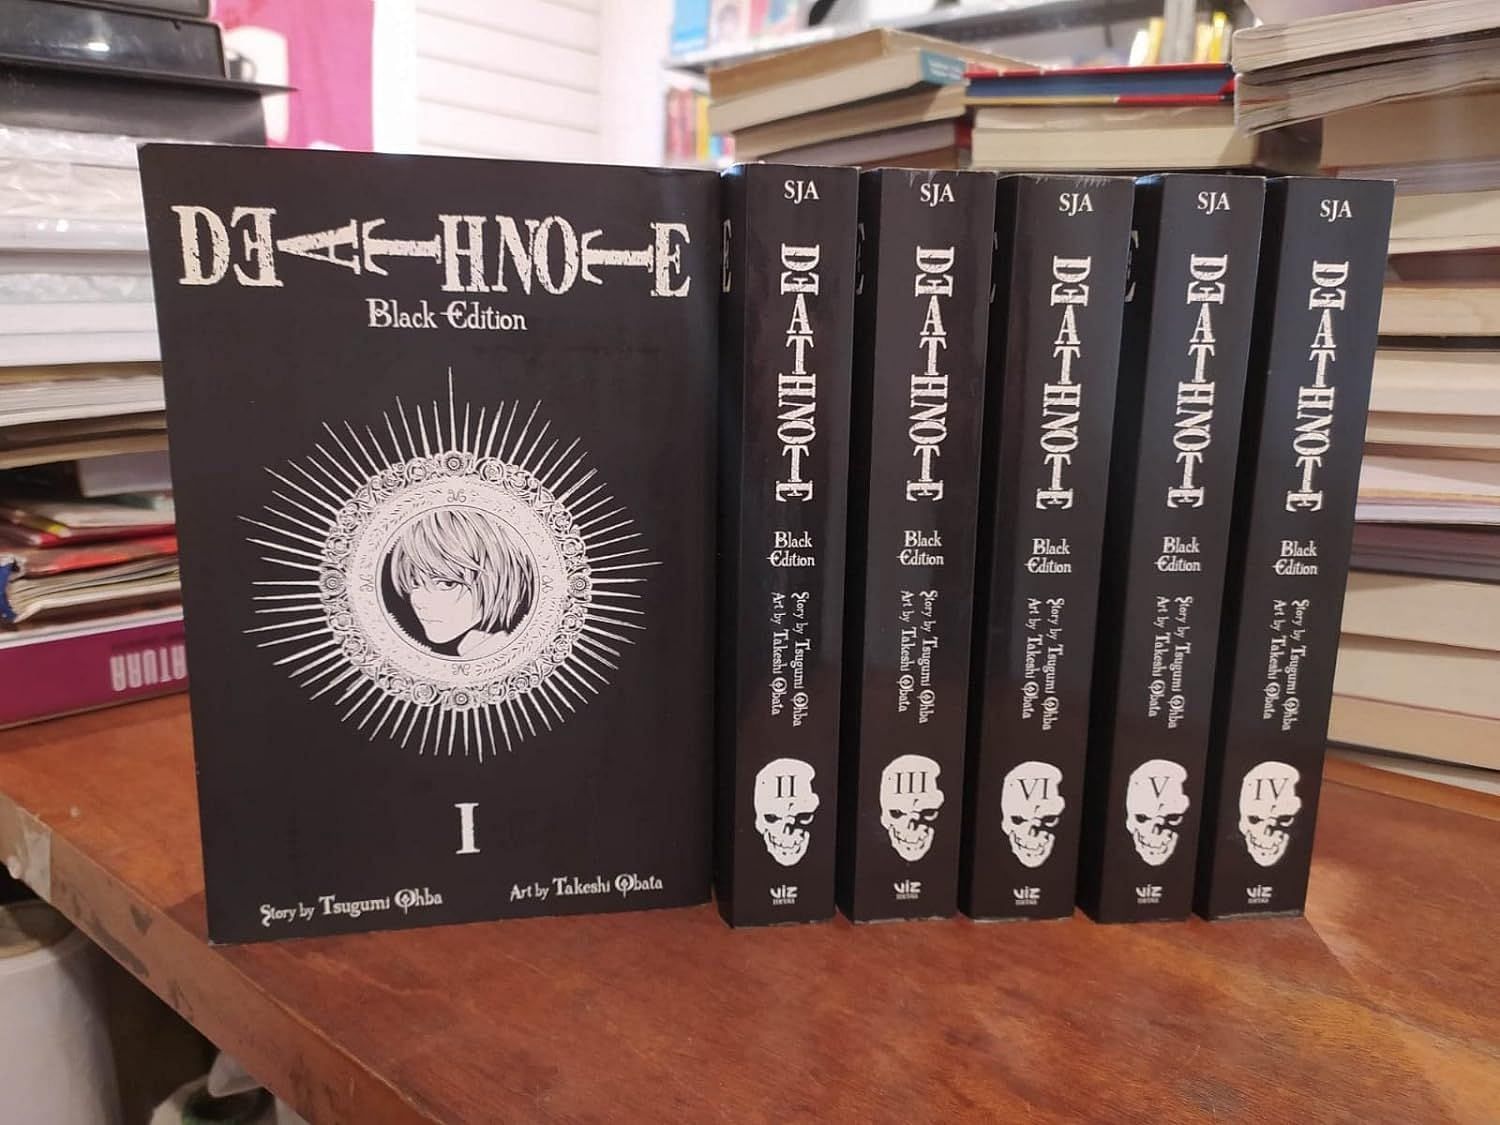 List of Death Note Volume, Released Date, and Title